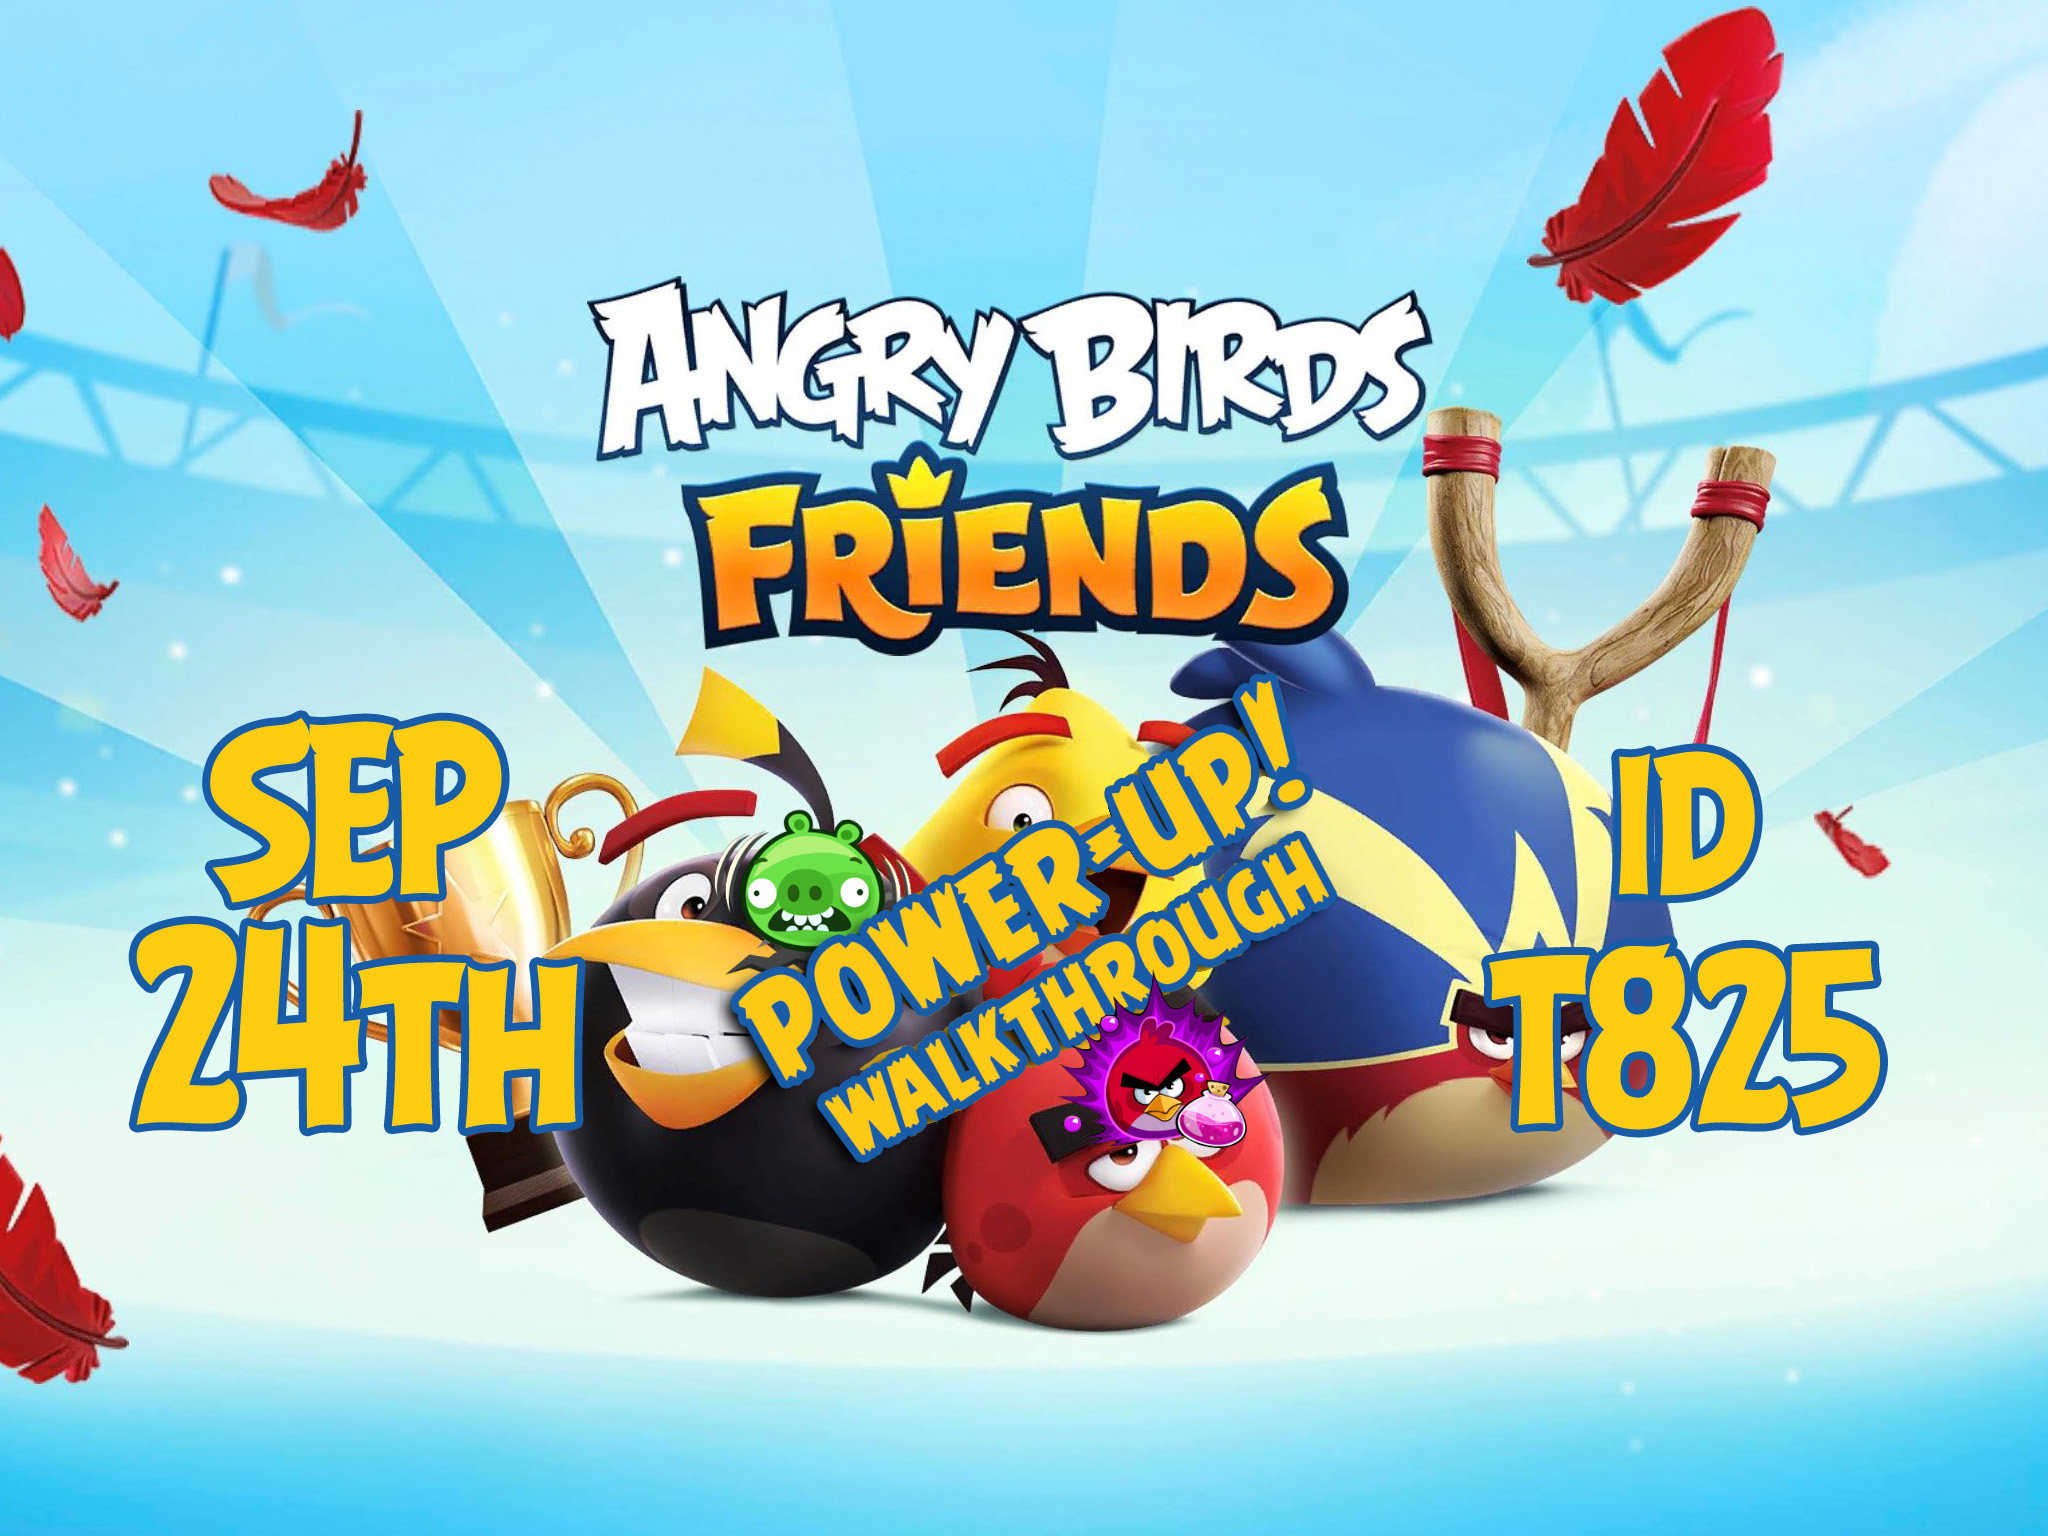 Angry-Birds-Friends-Tournament-T825-Feature-Image-PU